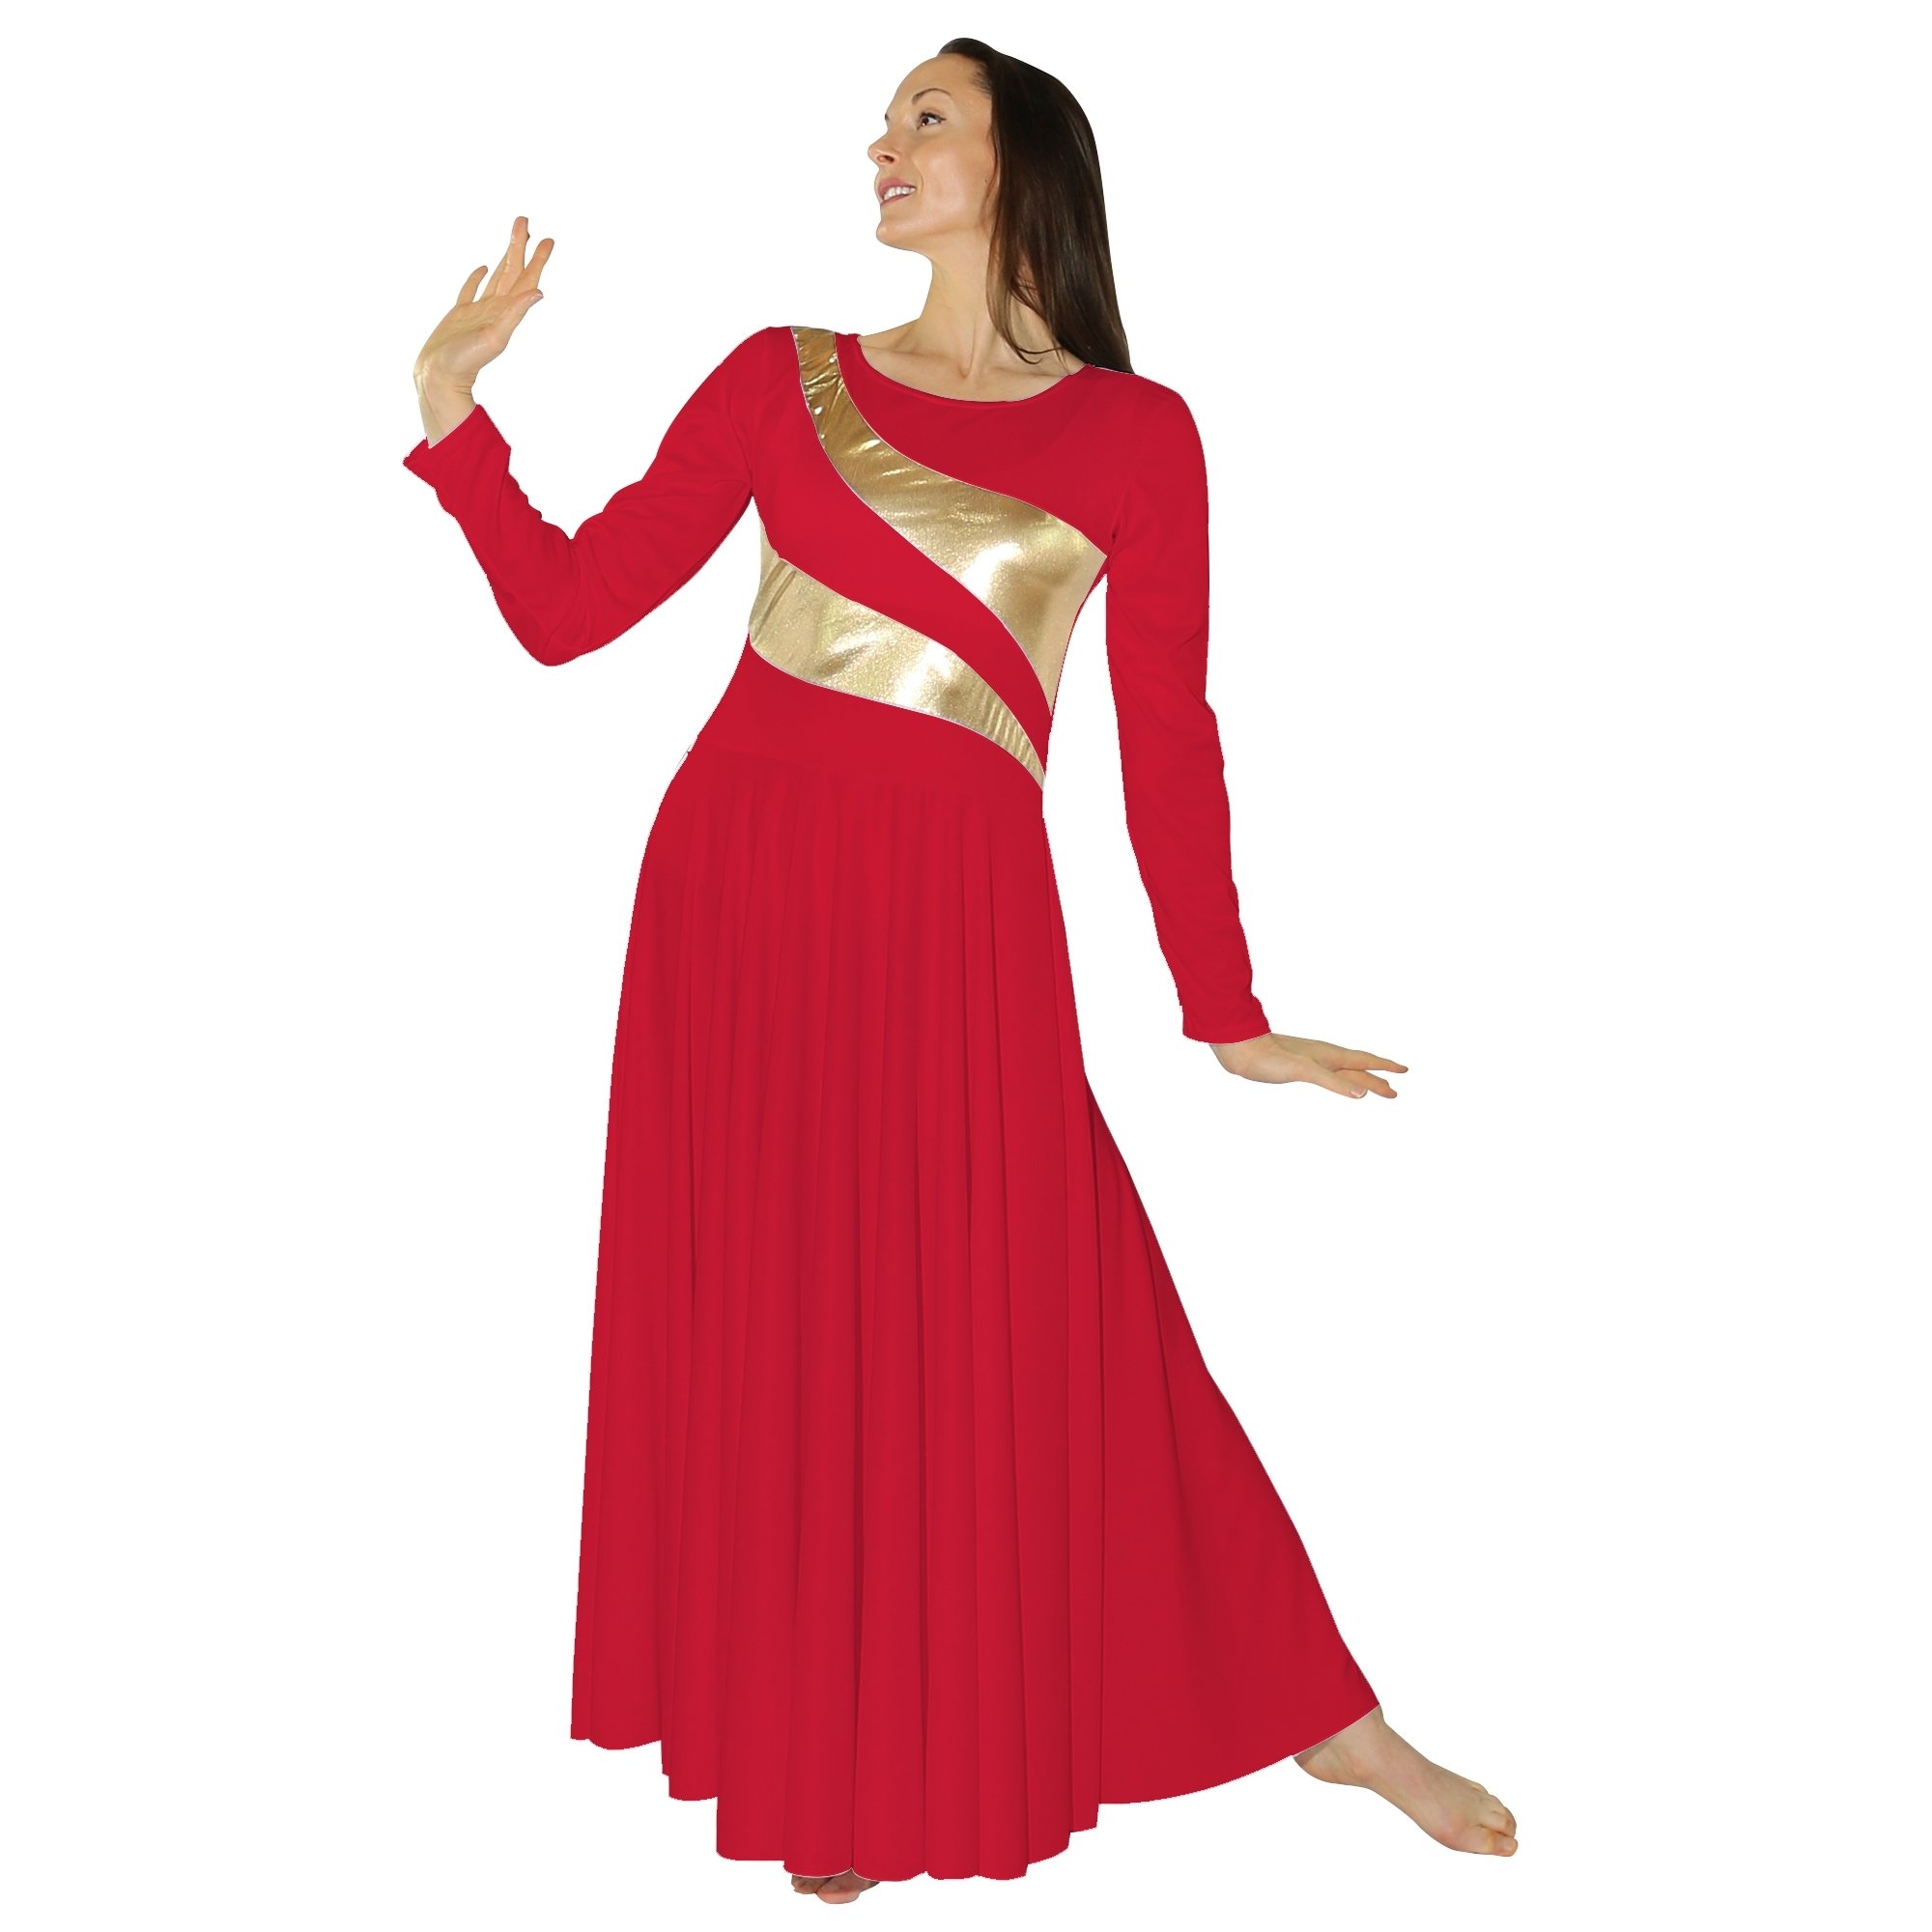 Danzcue Praise Dance Shimmery Parallel Long Sleeve Dress - Click Image to Close